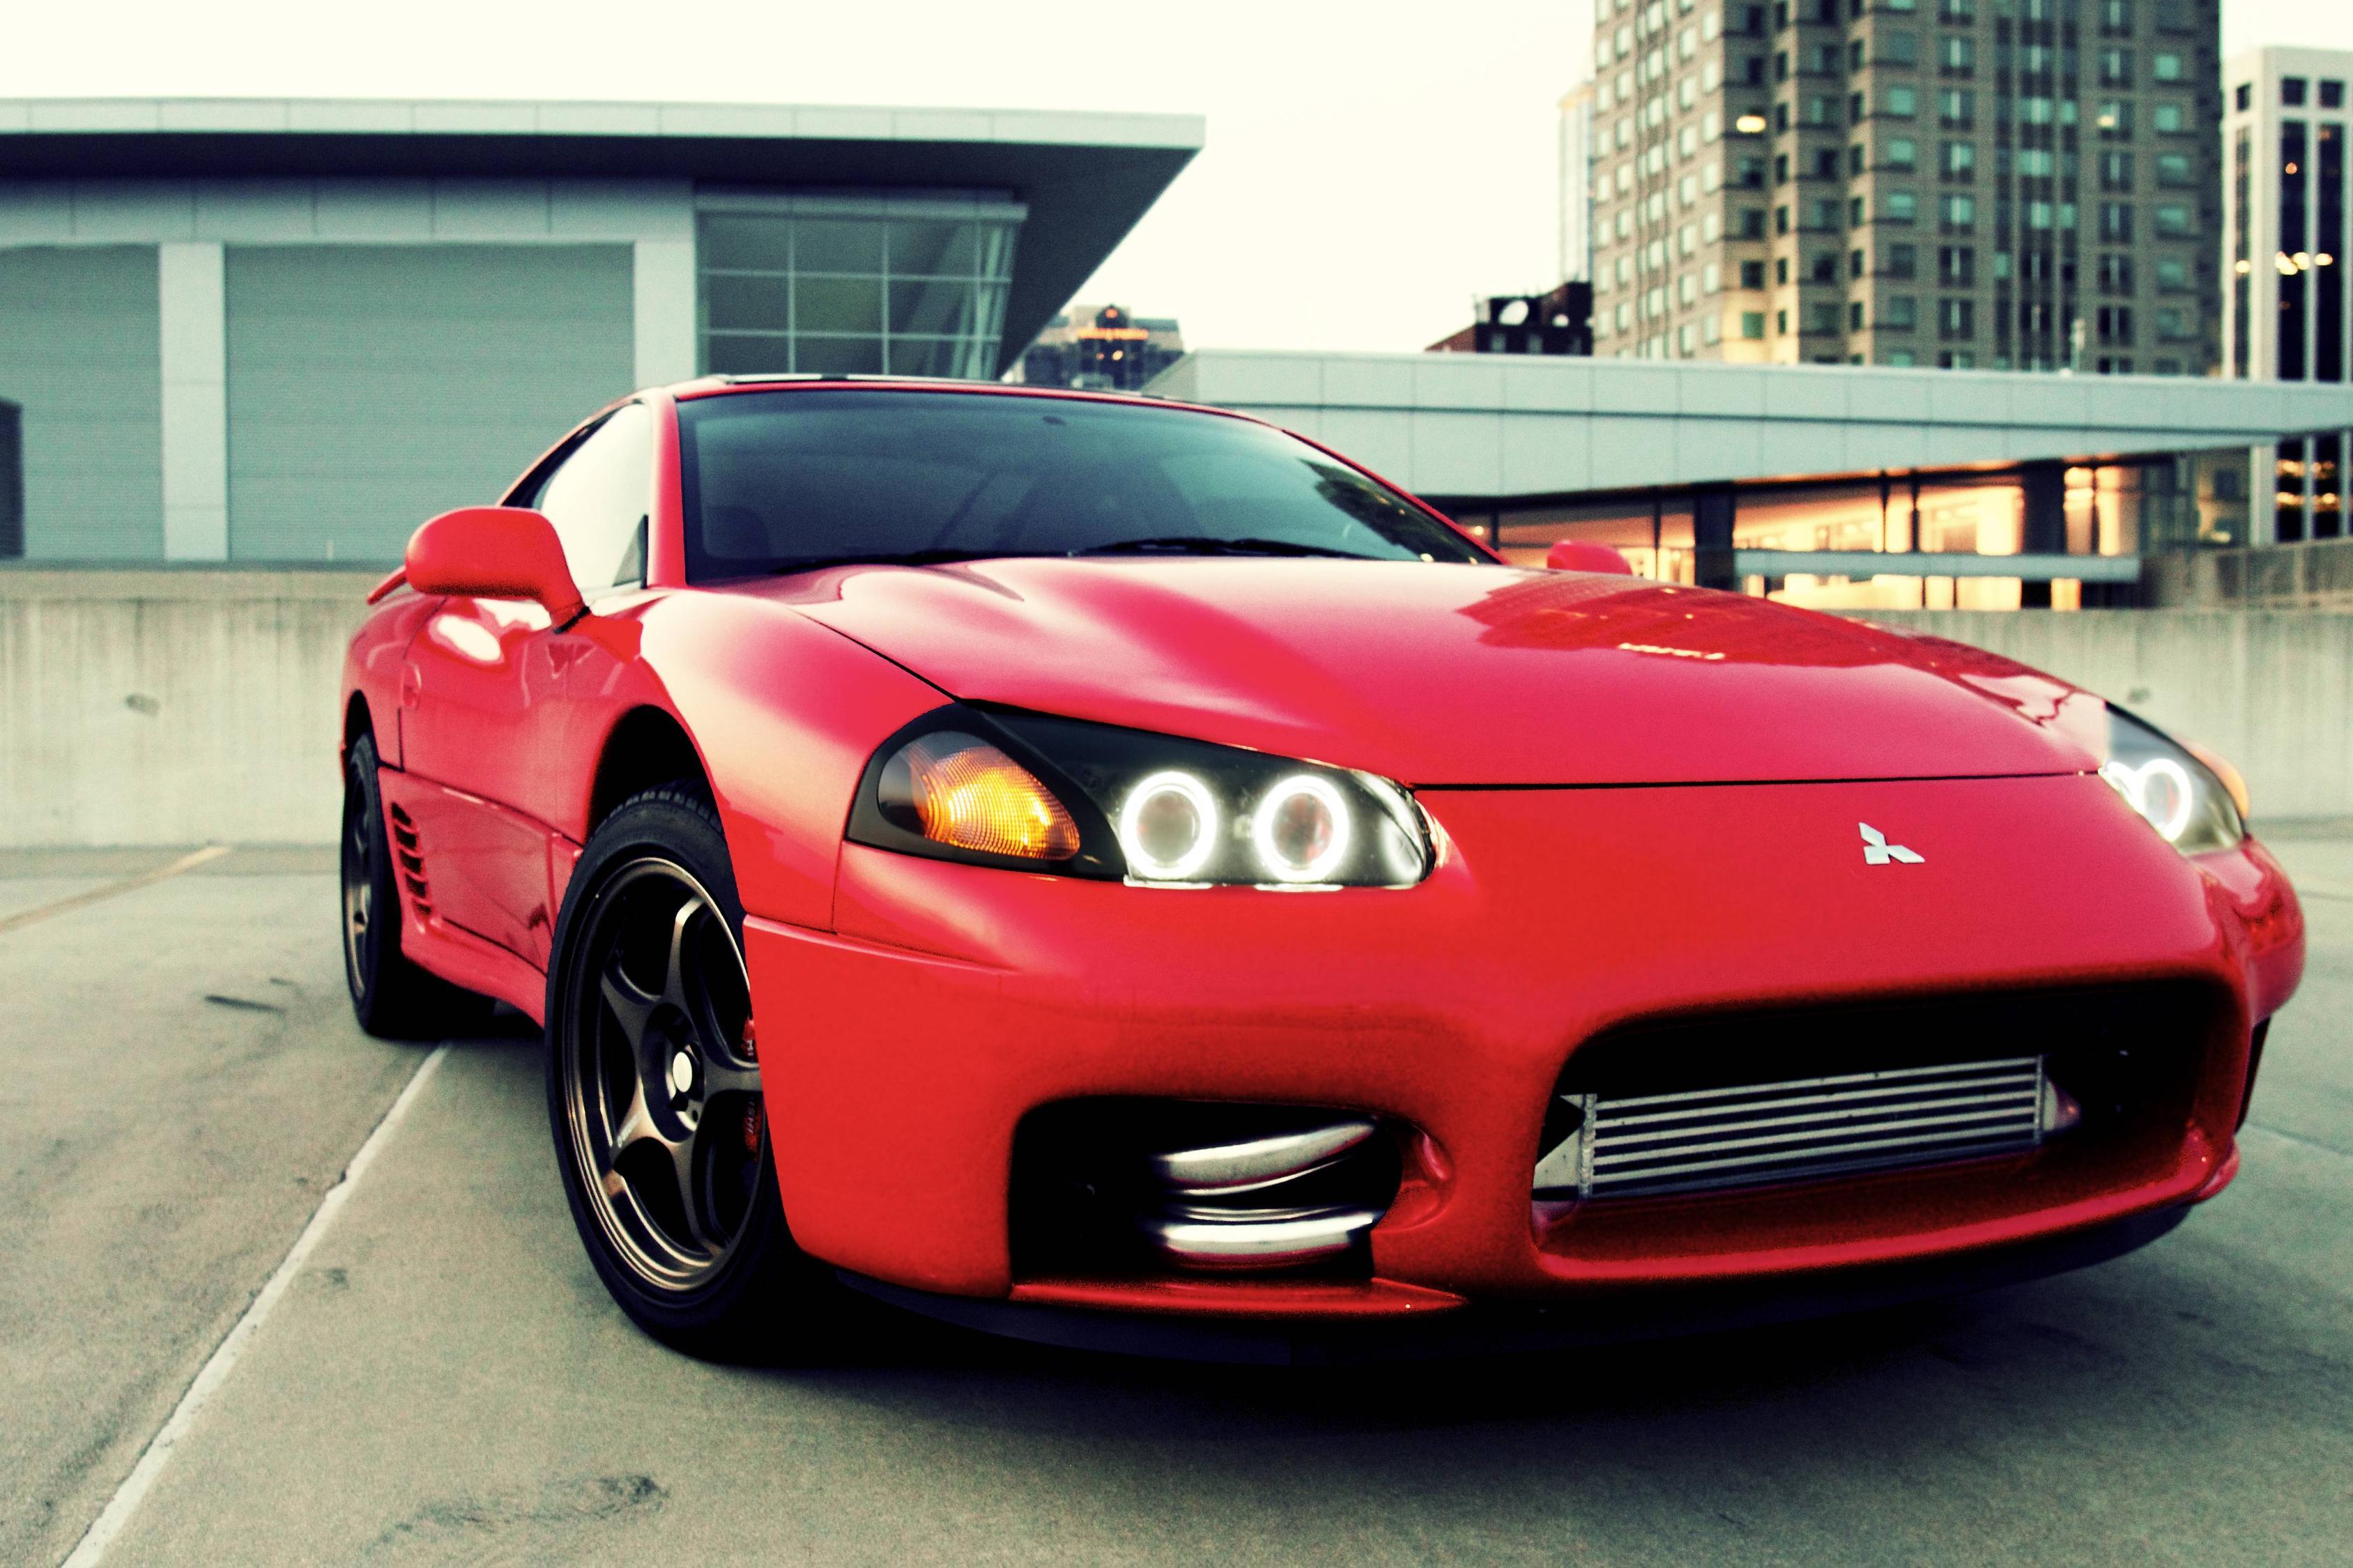 Affordable Mitsubishi 3000gt Vr4 With Gitao on cars Design